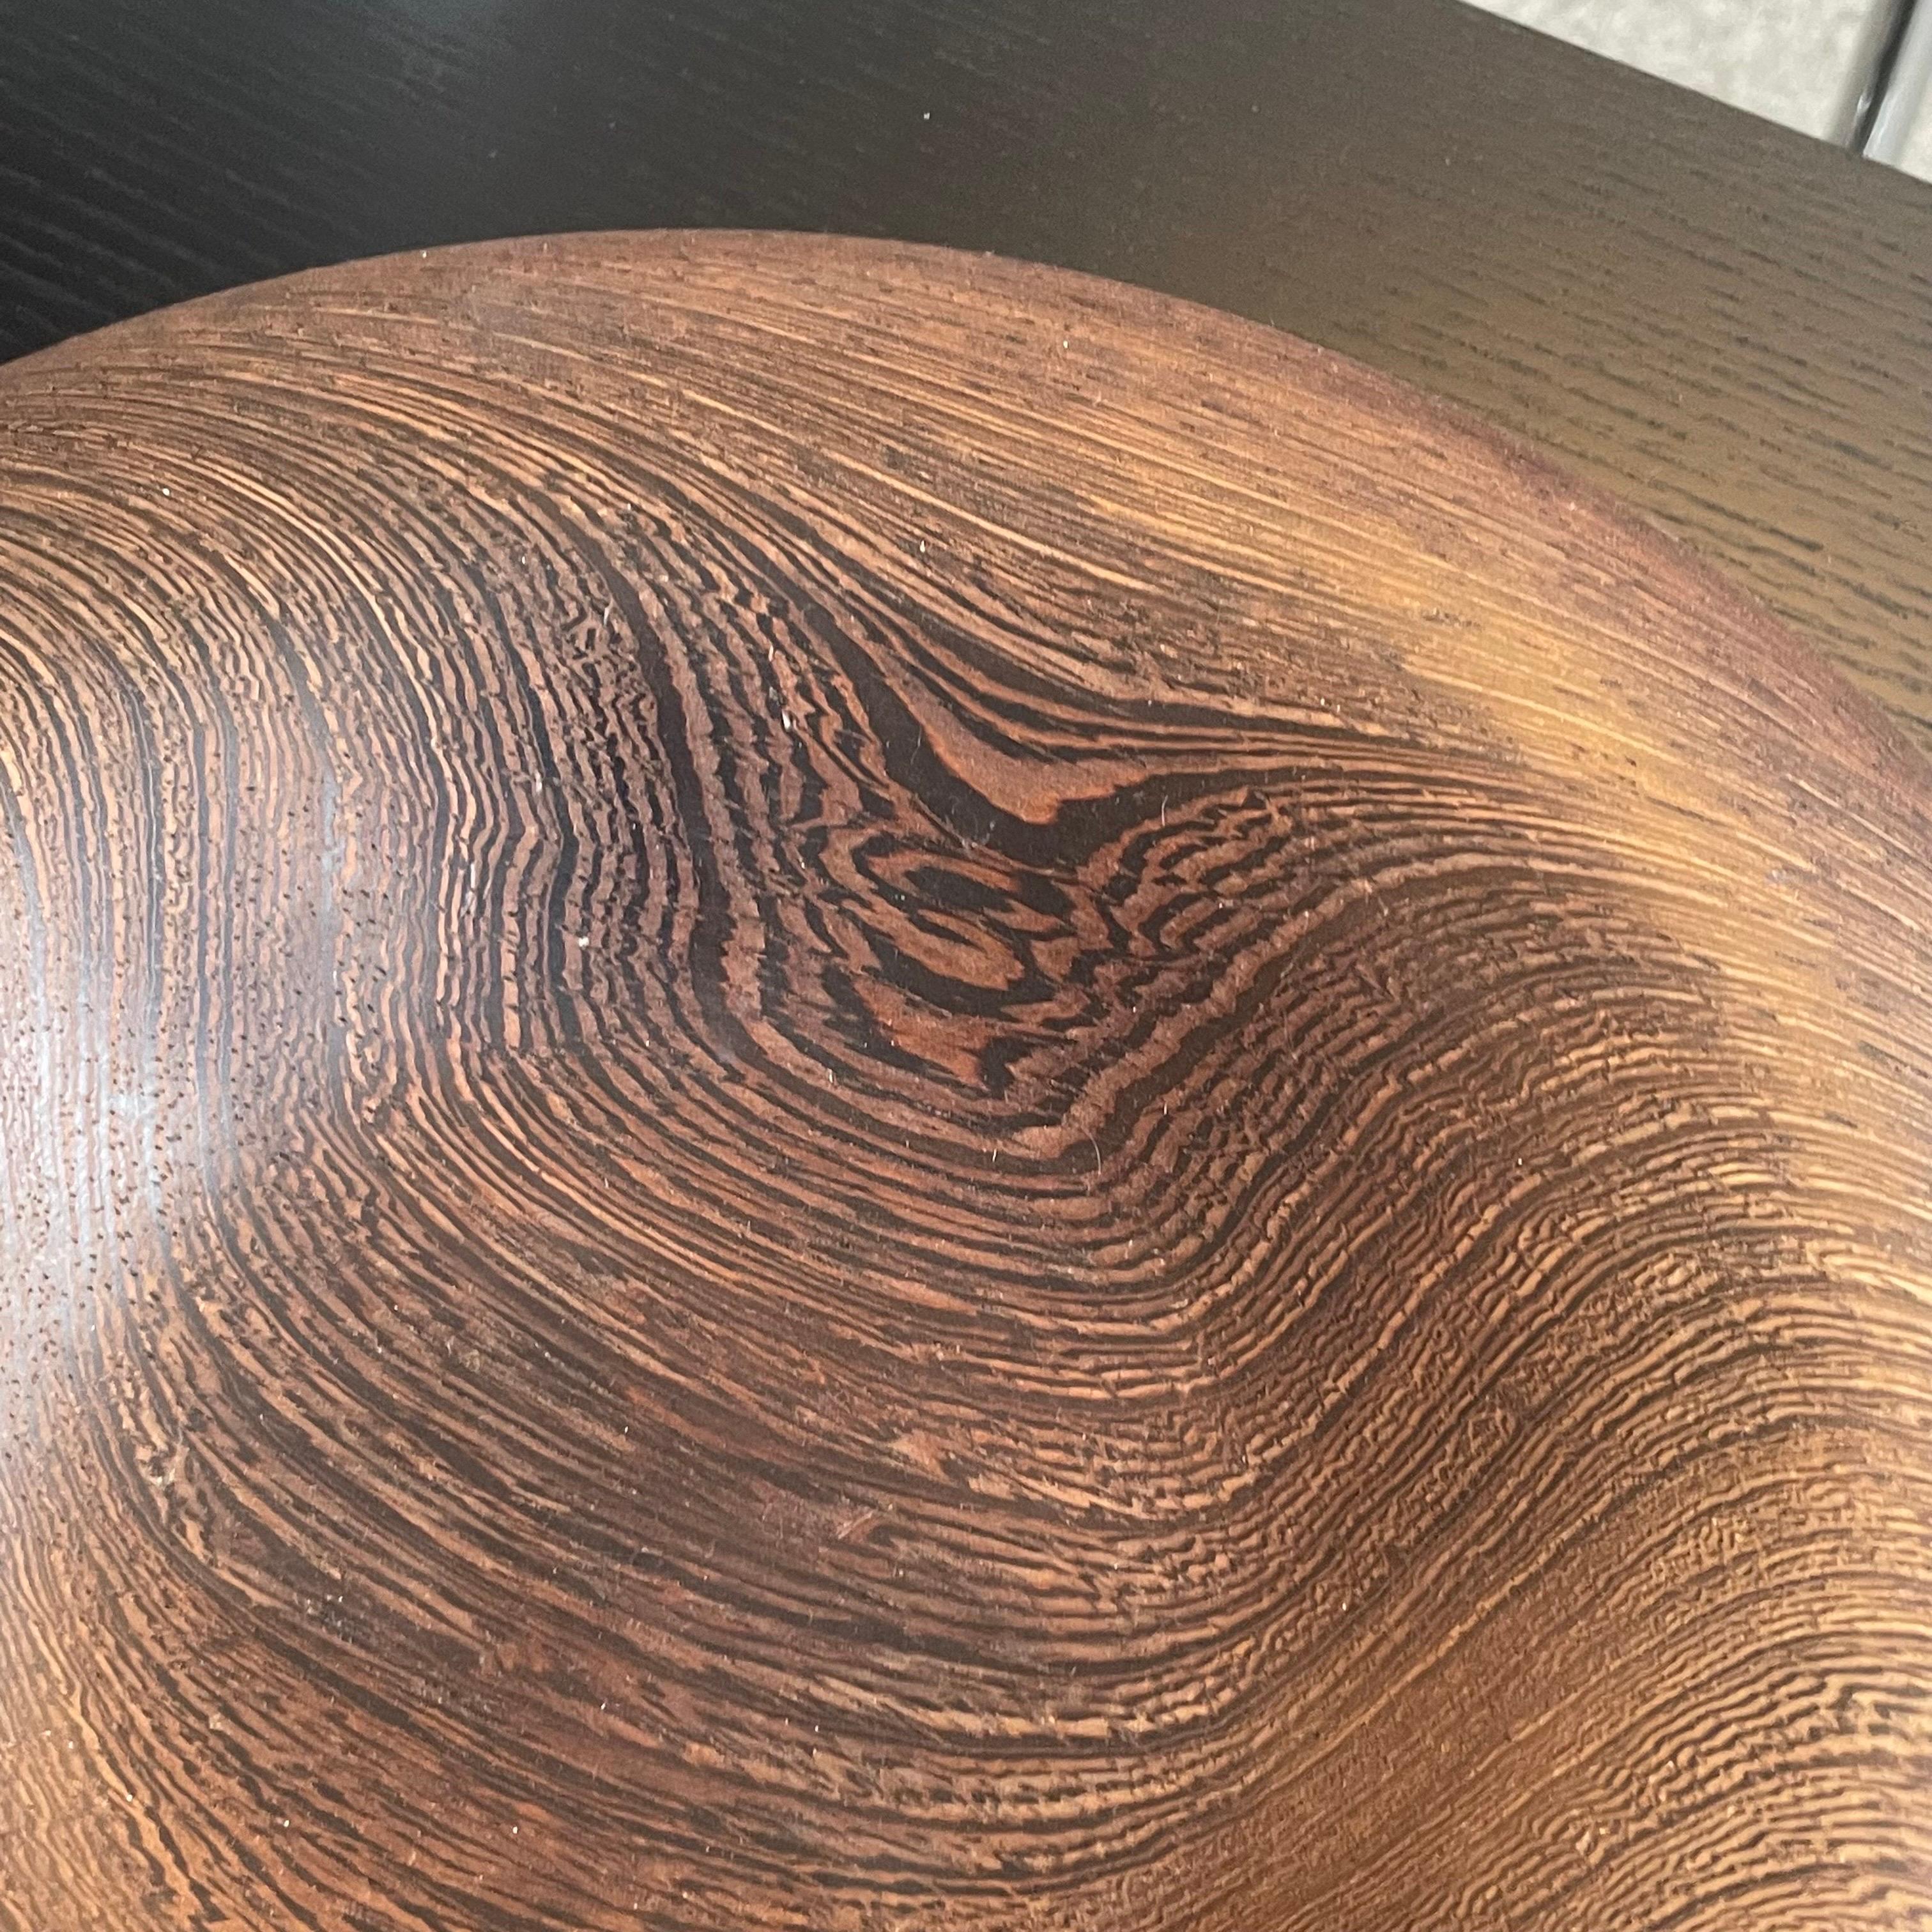 Mid Century Bowl in Solid Wengé, 1960s.

Beautiful turned decorative bowl in solid wengé. Wonderful organic shape and a very distinct wood grain - quintessentially wengé. A great decorative piece on your desk, table or sideboard. Good size and